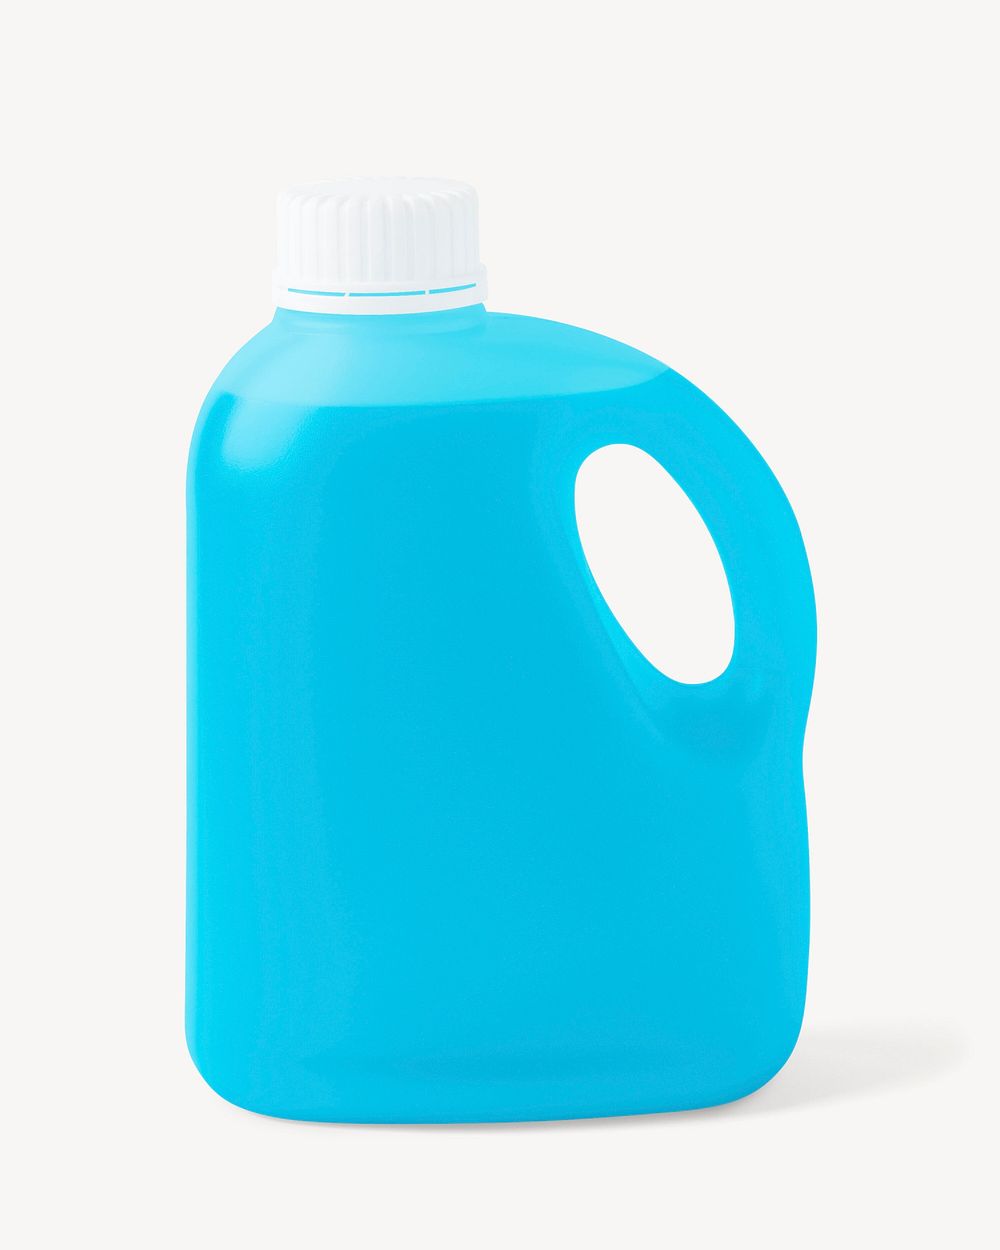 Blue plastic gallon, product packaging